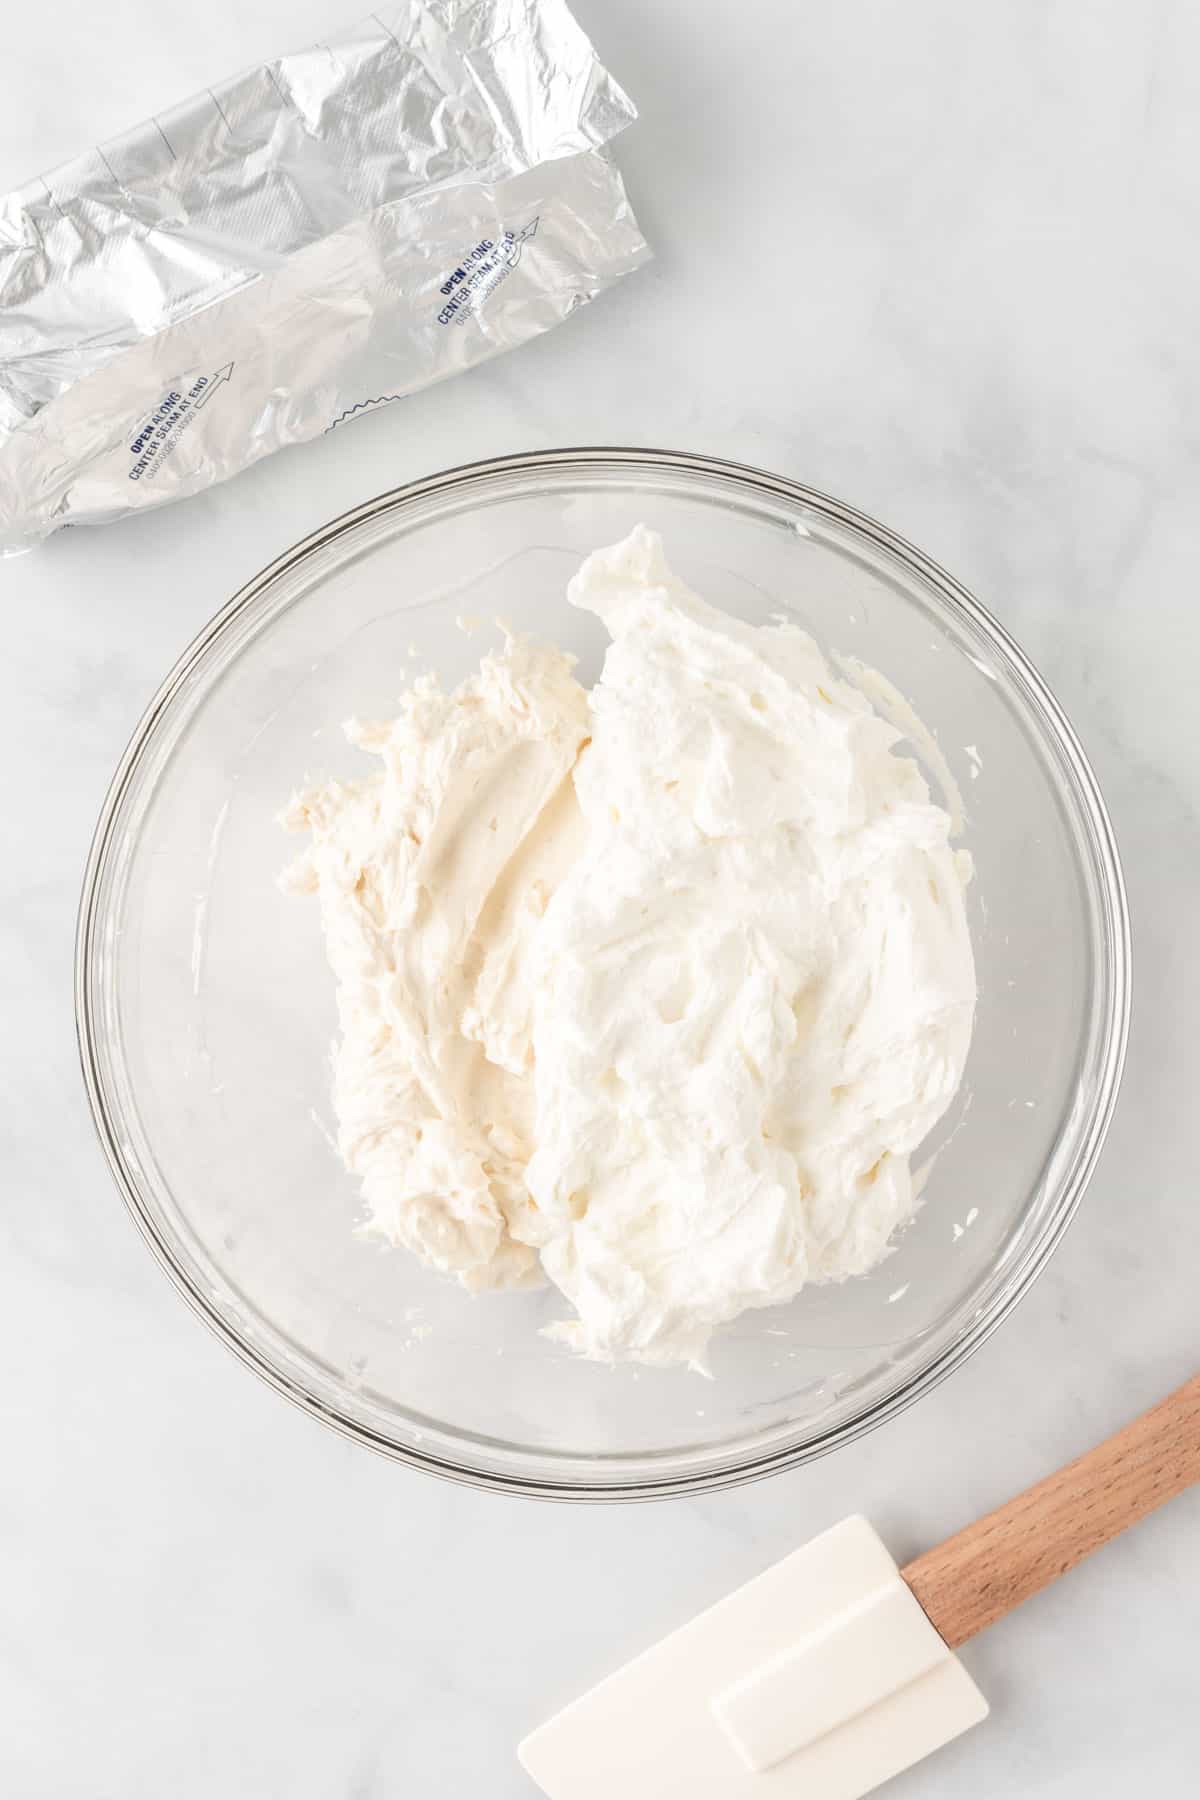 cream cheese and whipped cream filling in a bowl